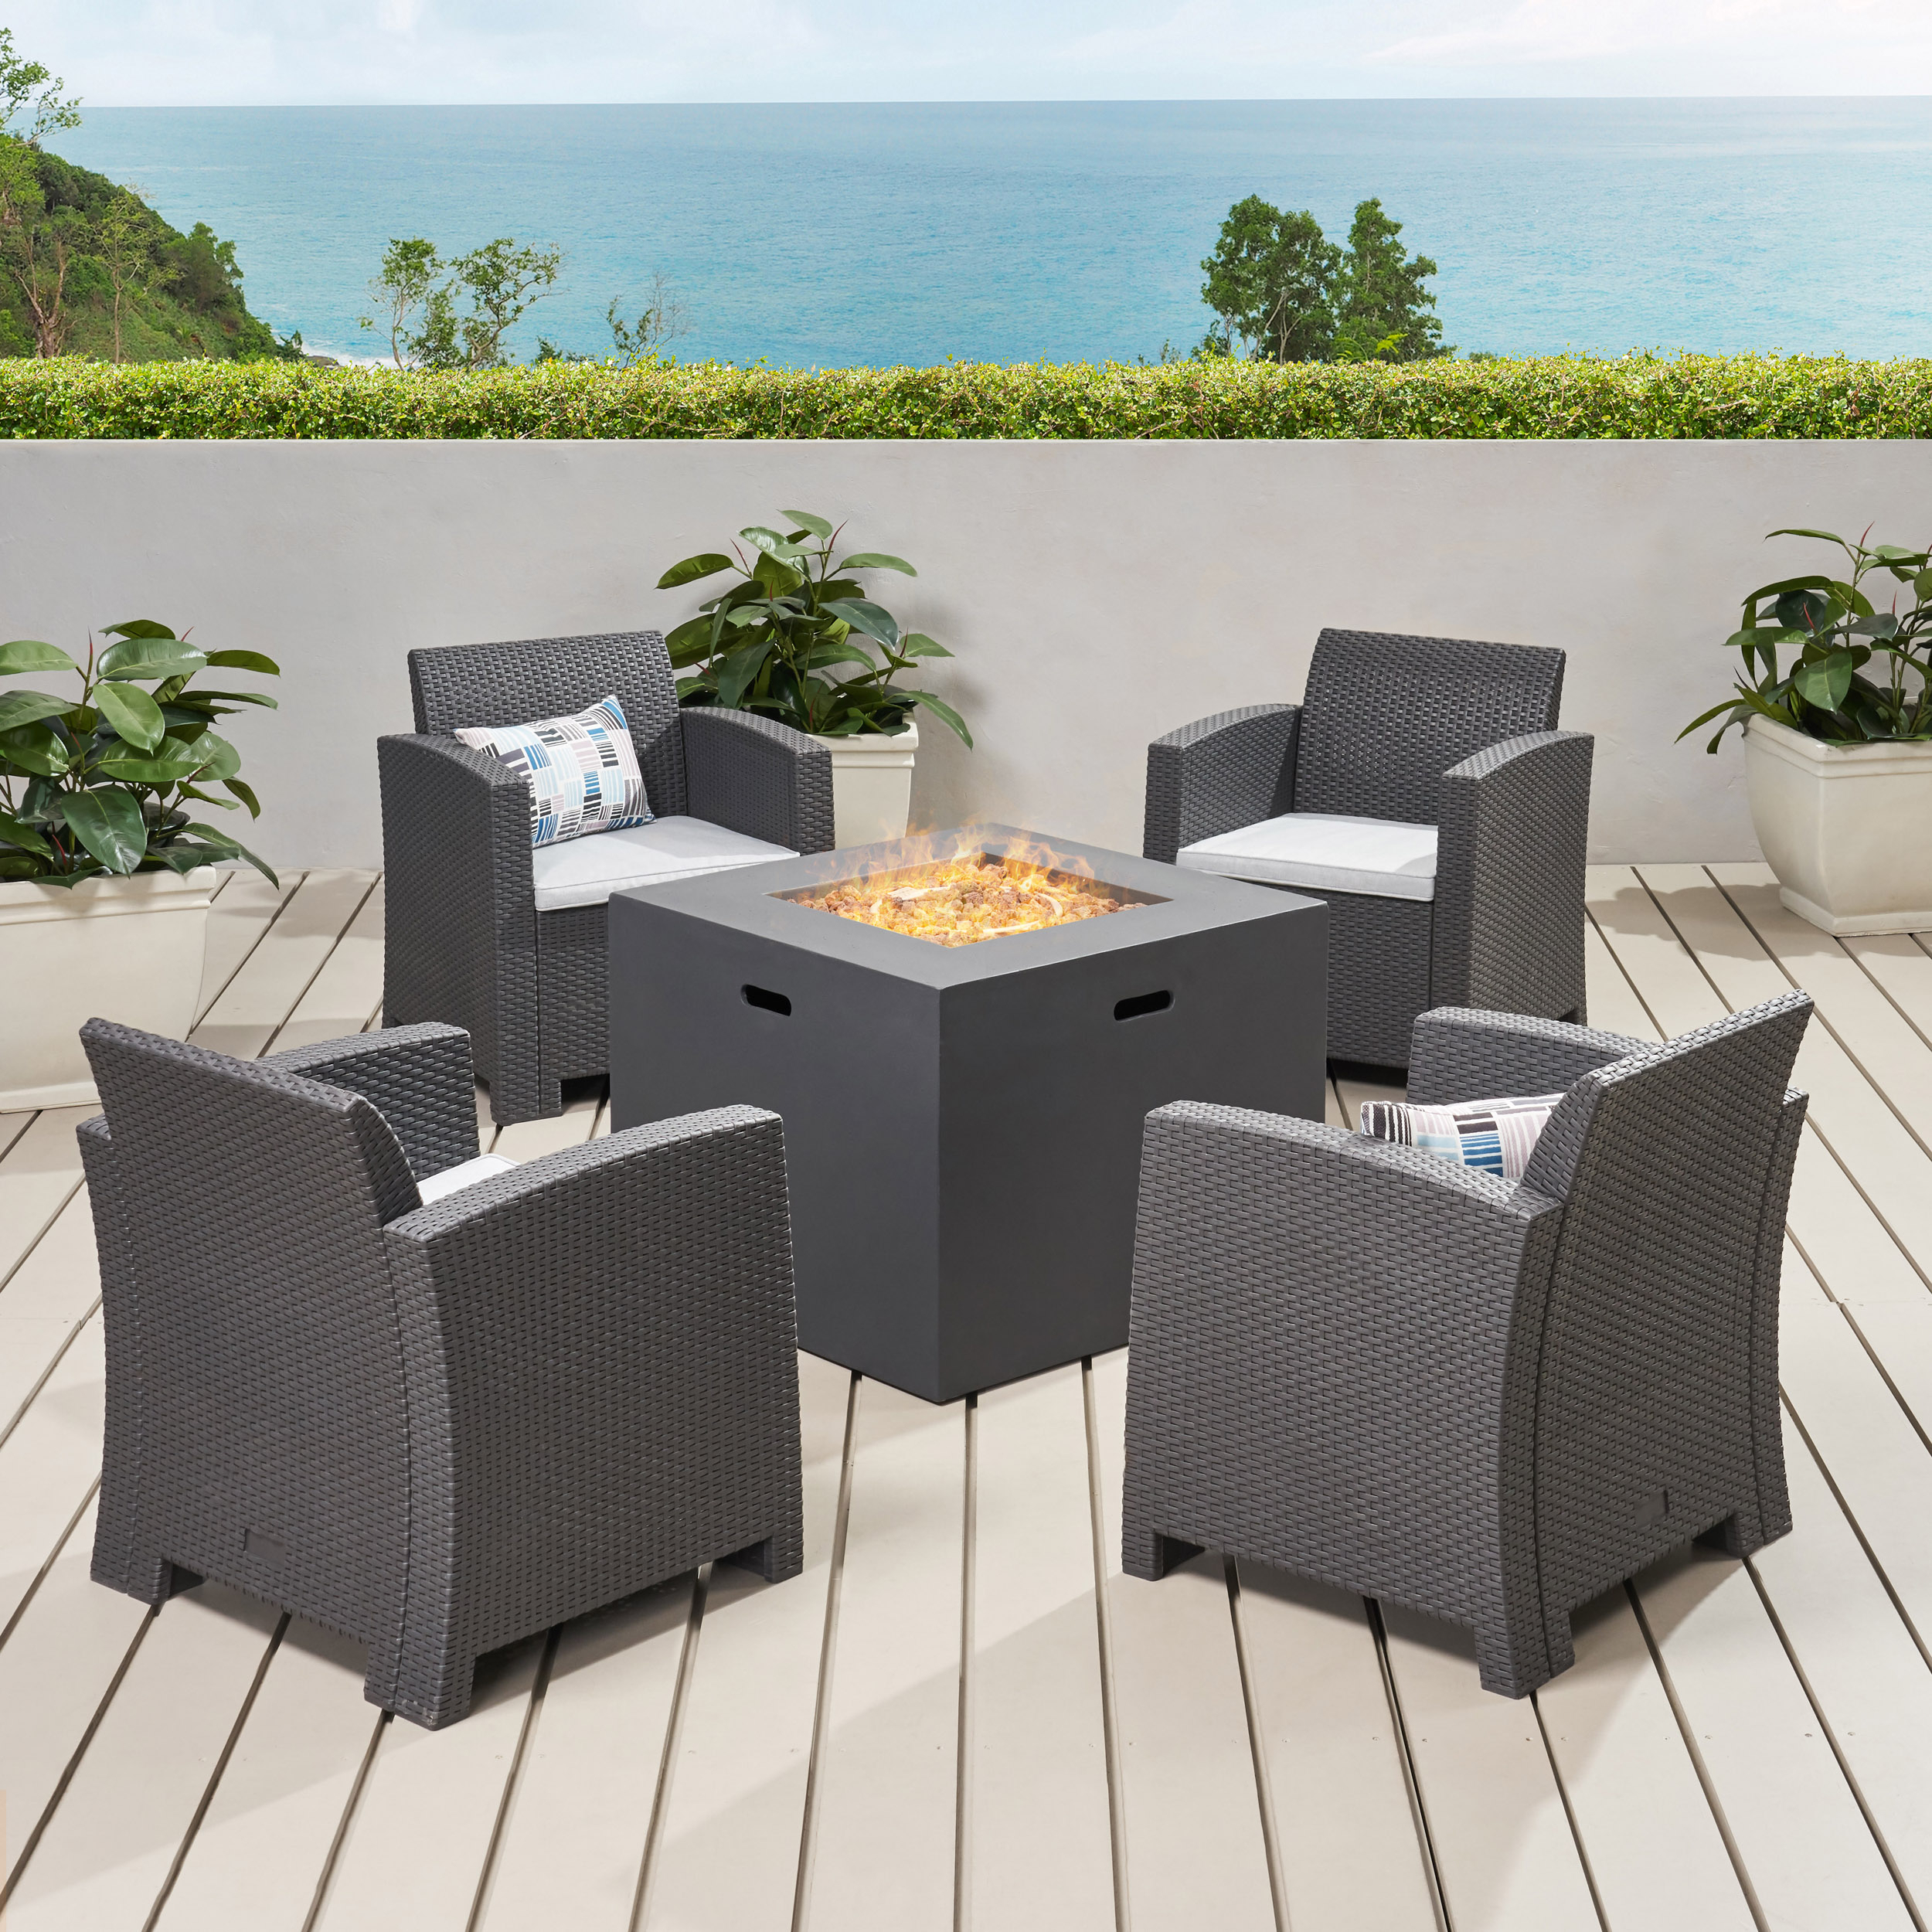 Houston Outdoor 4-Seater Wicker Print Chat Set With Propane Fire Pit - Brown + Mixed Biege + Light Gray